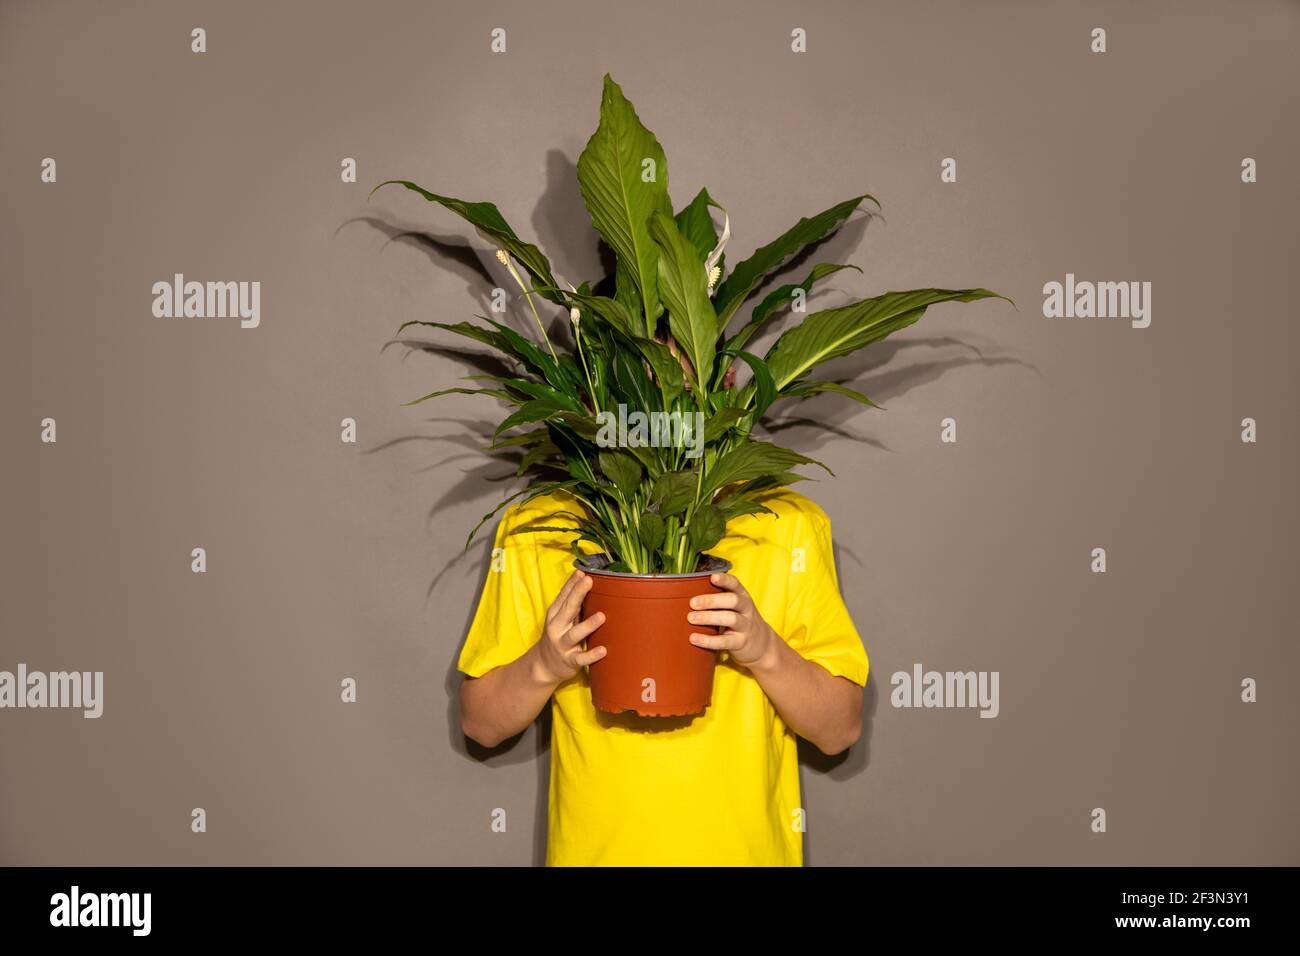 Unrecognizable people boy teenager young man hid behind pot with home flower with large green leaves. Obscured Face Stock Photo